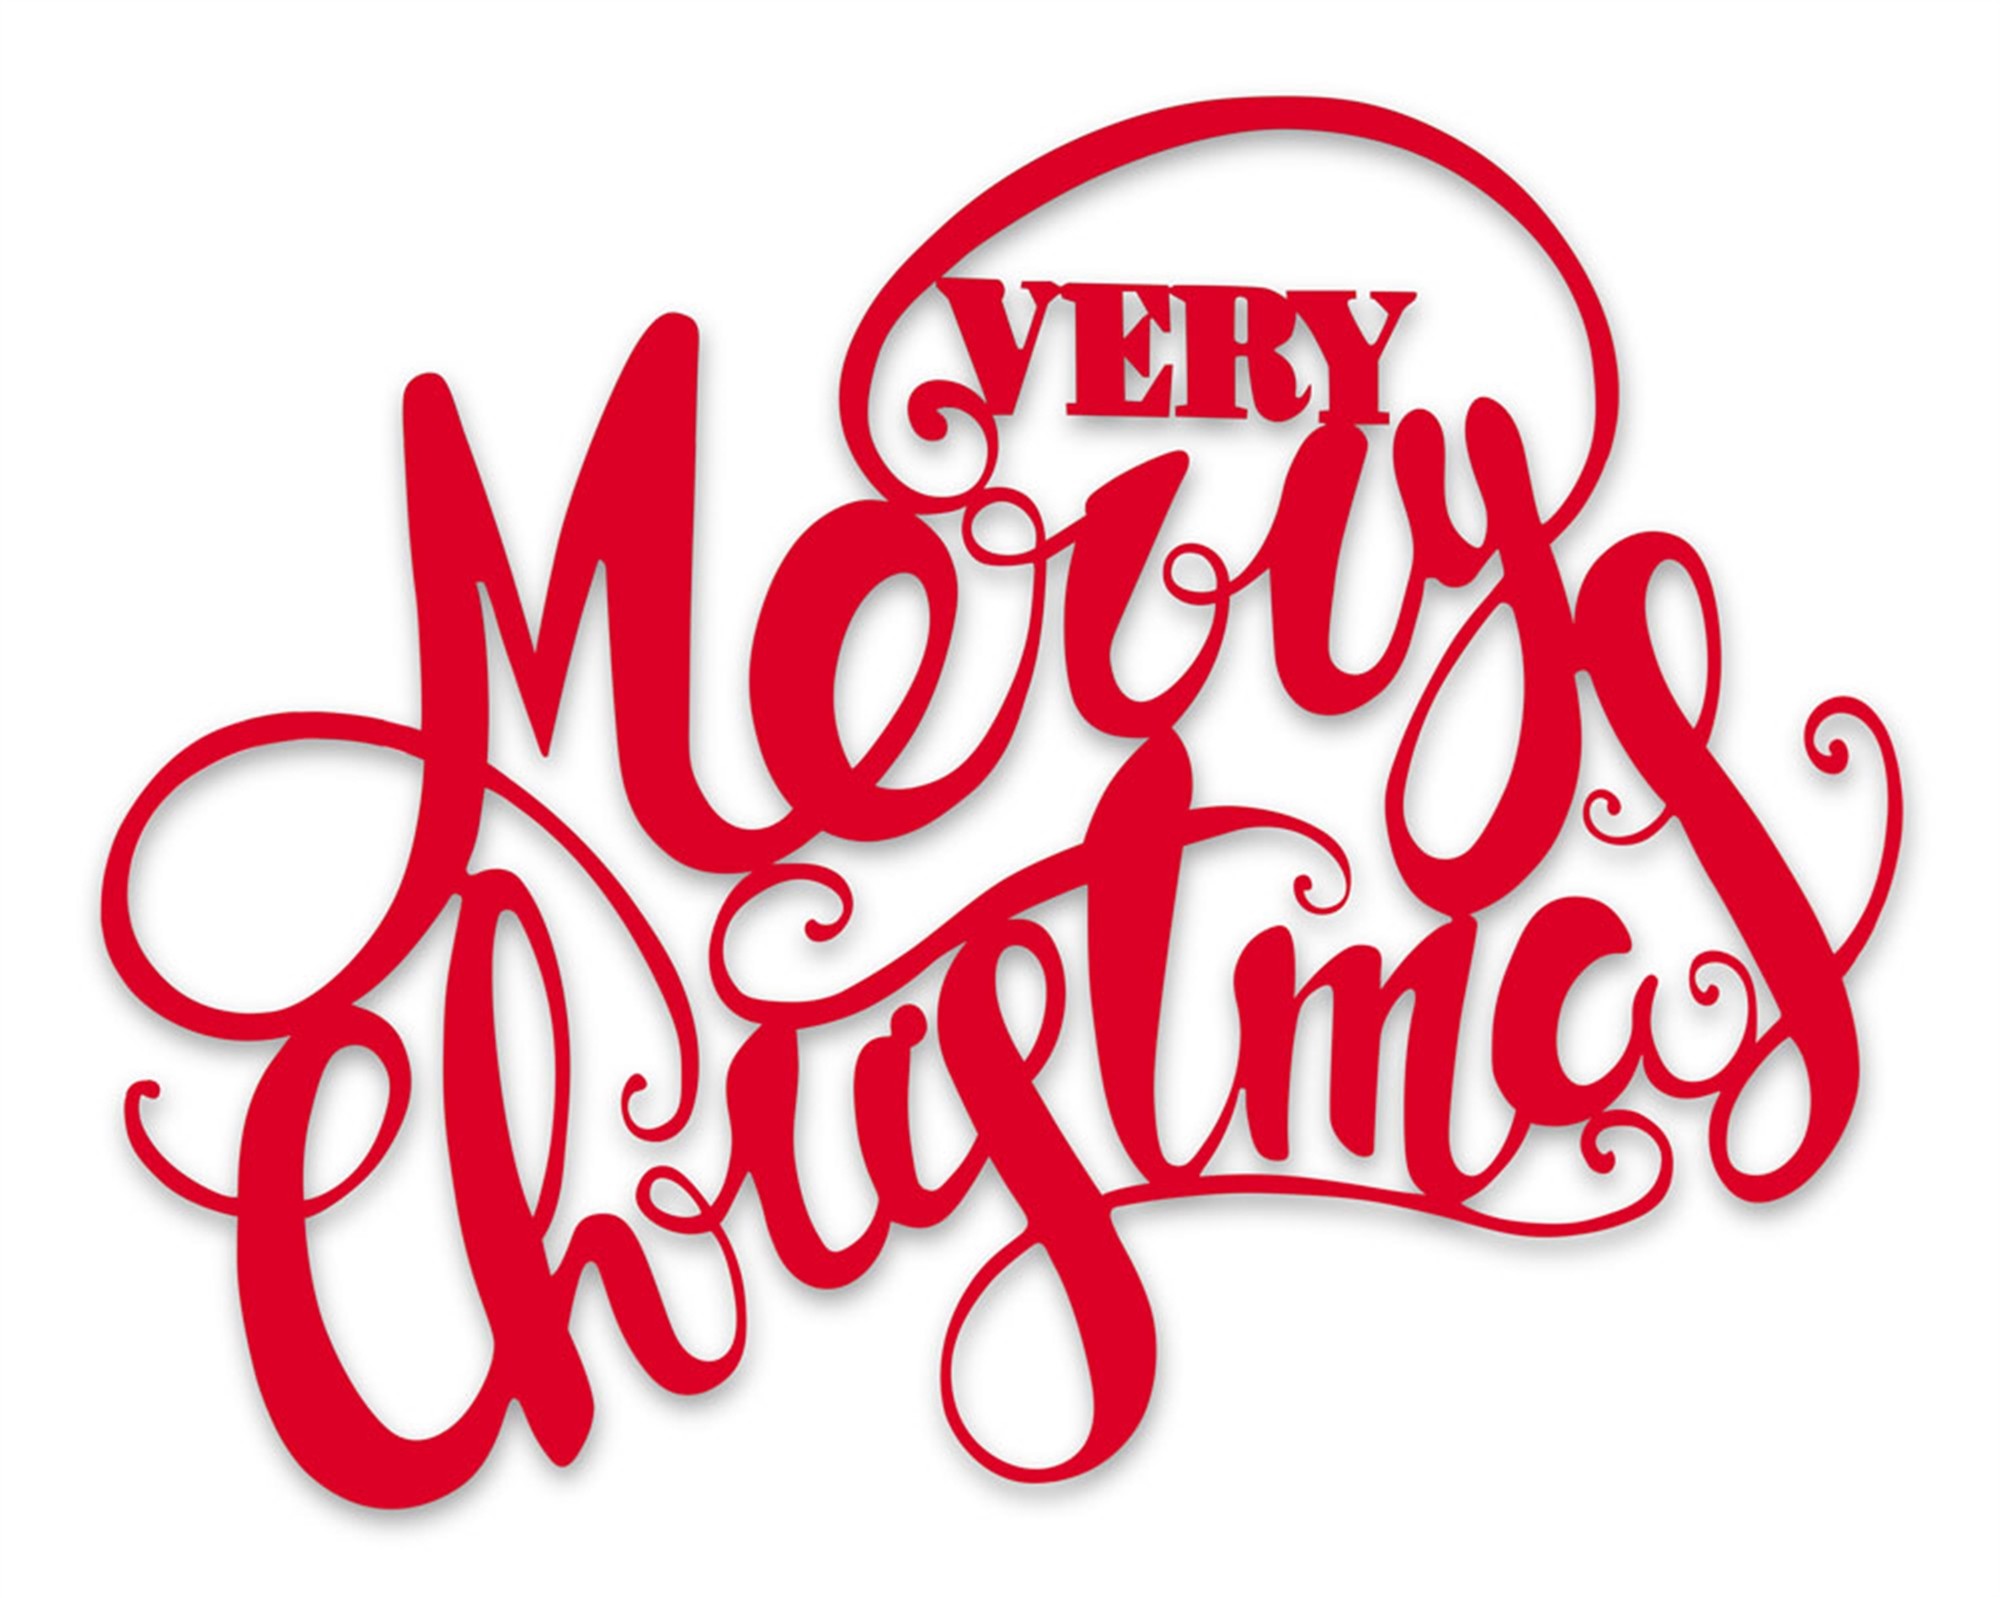 Very Merry Christmas Sign 59"L x 45"H Iron